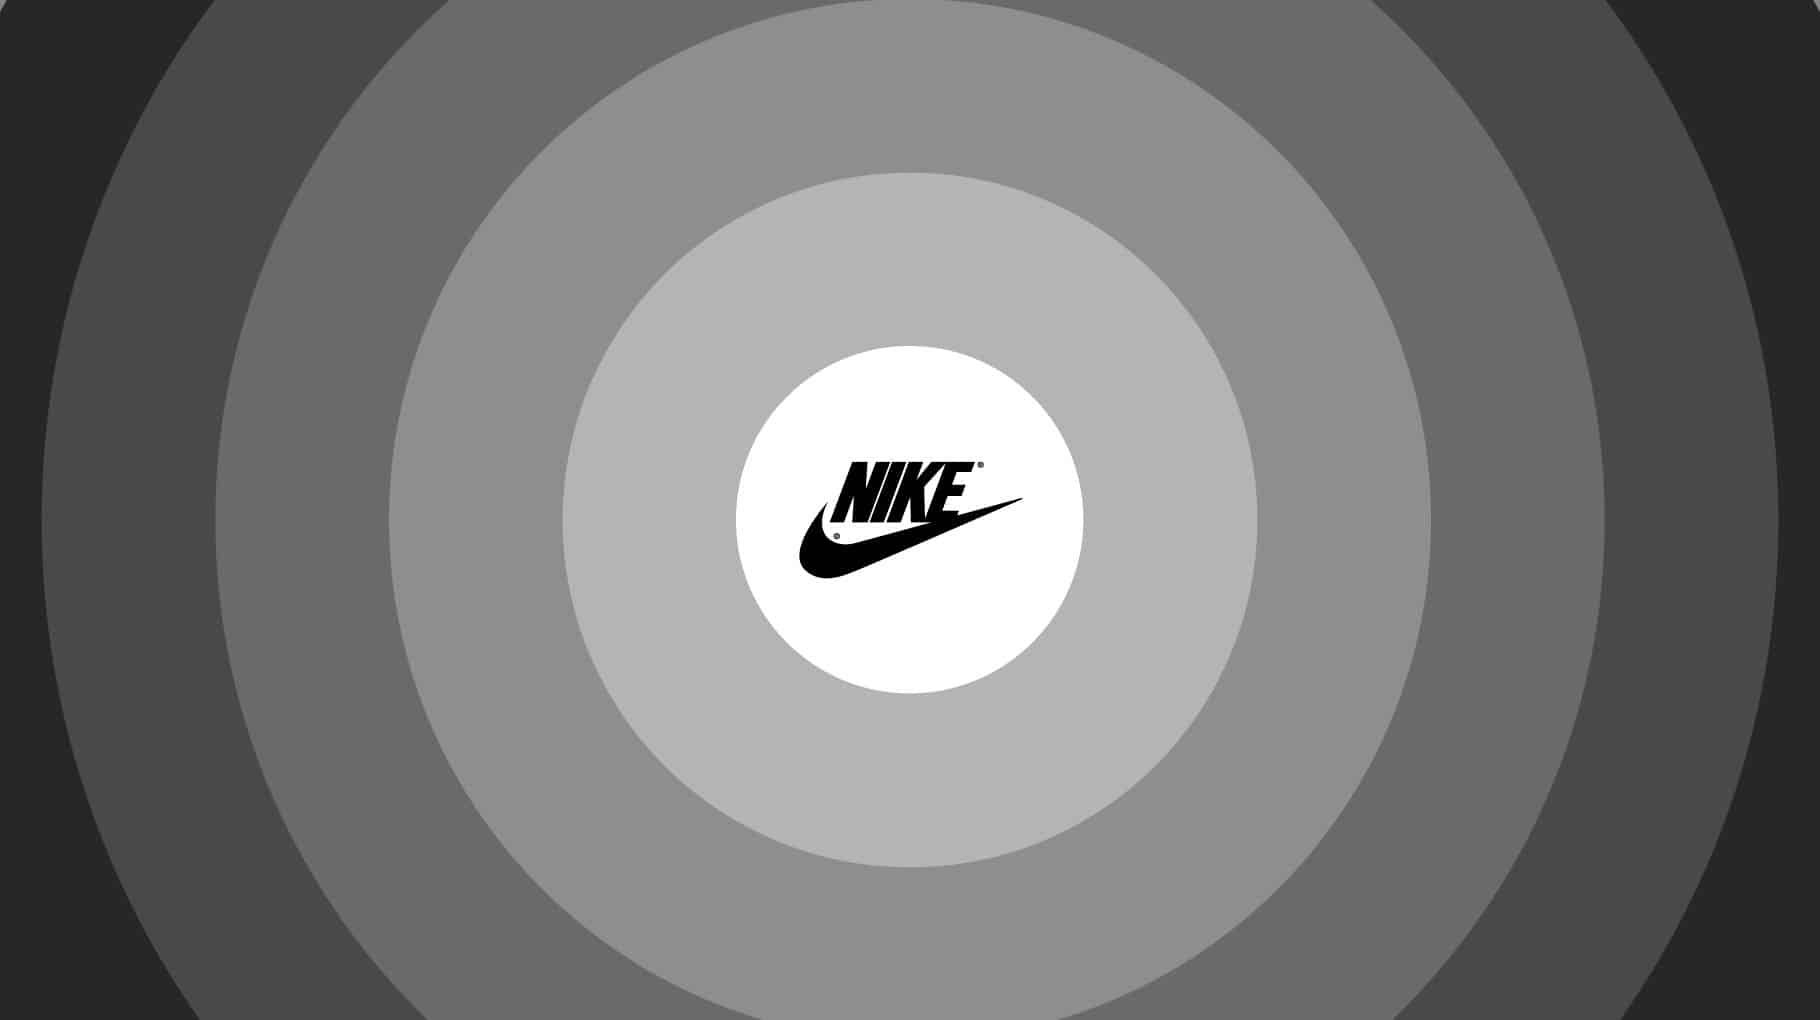 Nike Revenue and Growth